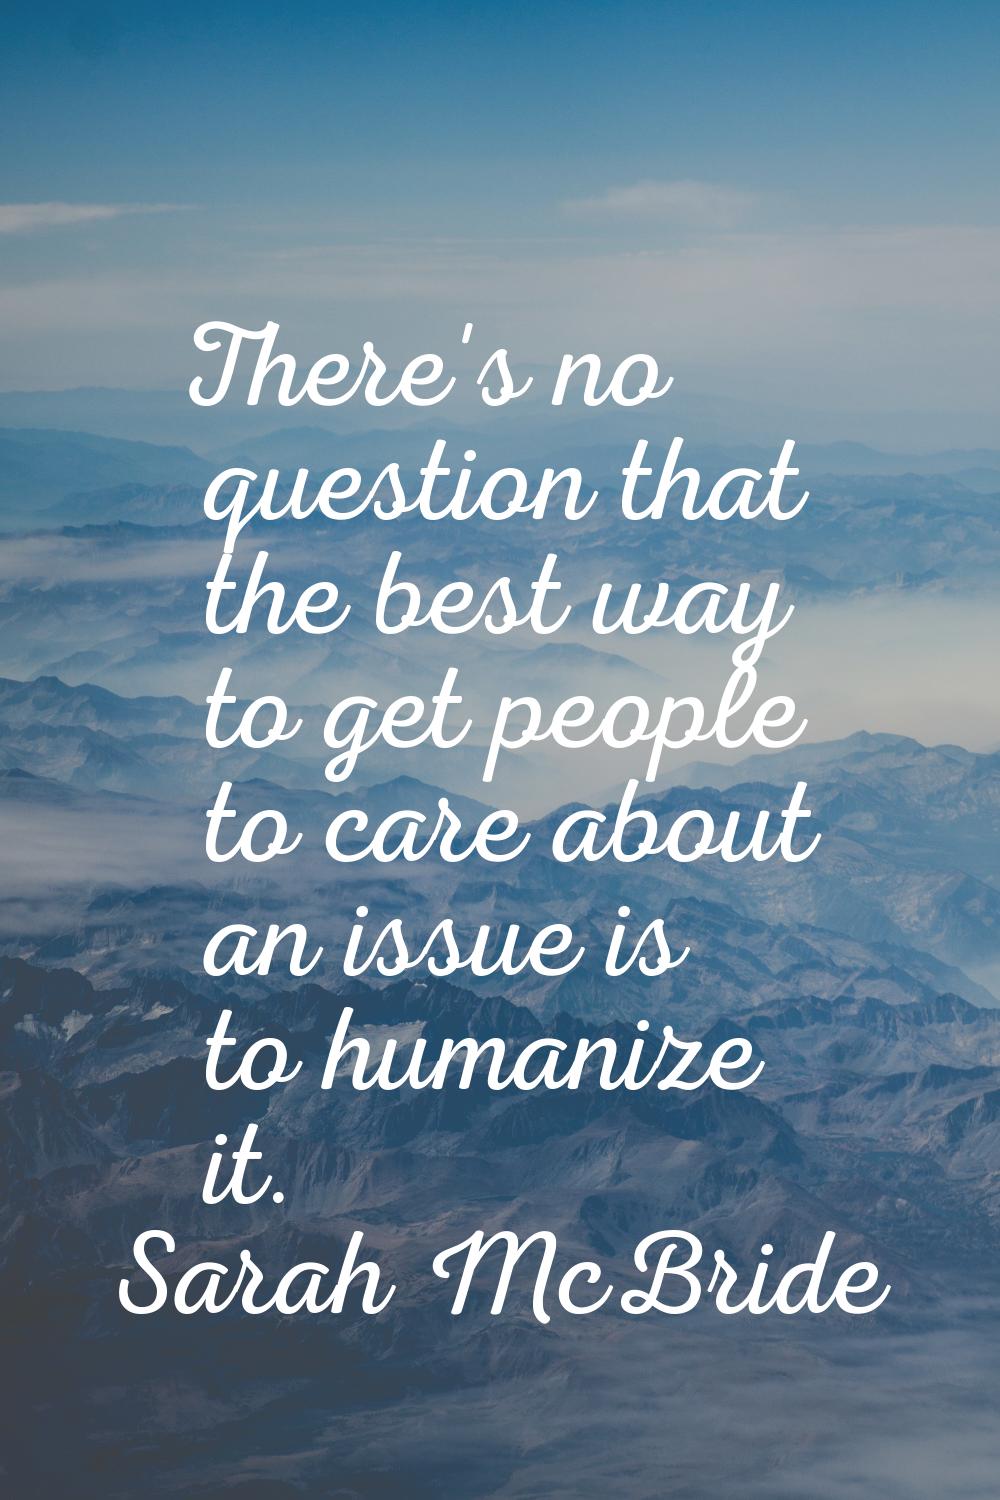 There's no question that the best way to get people to care about an issue is to humanize it.